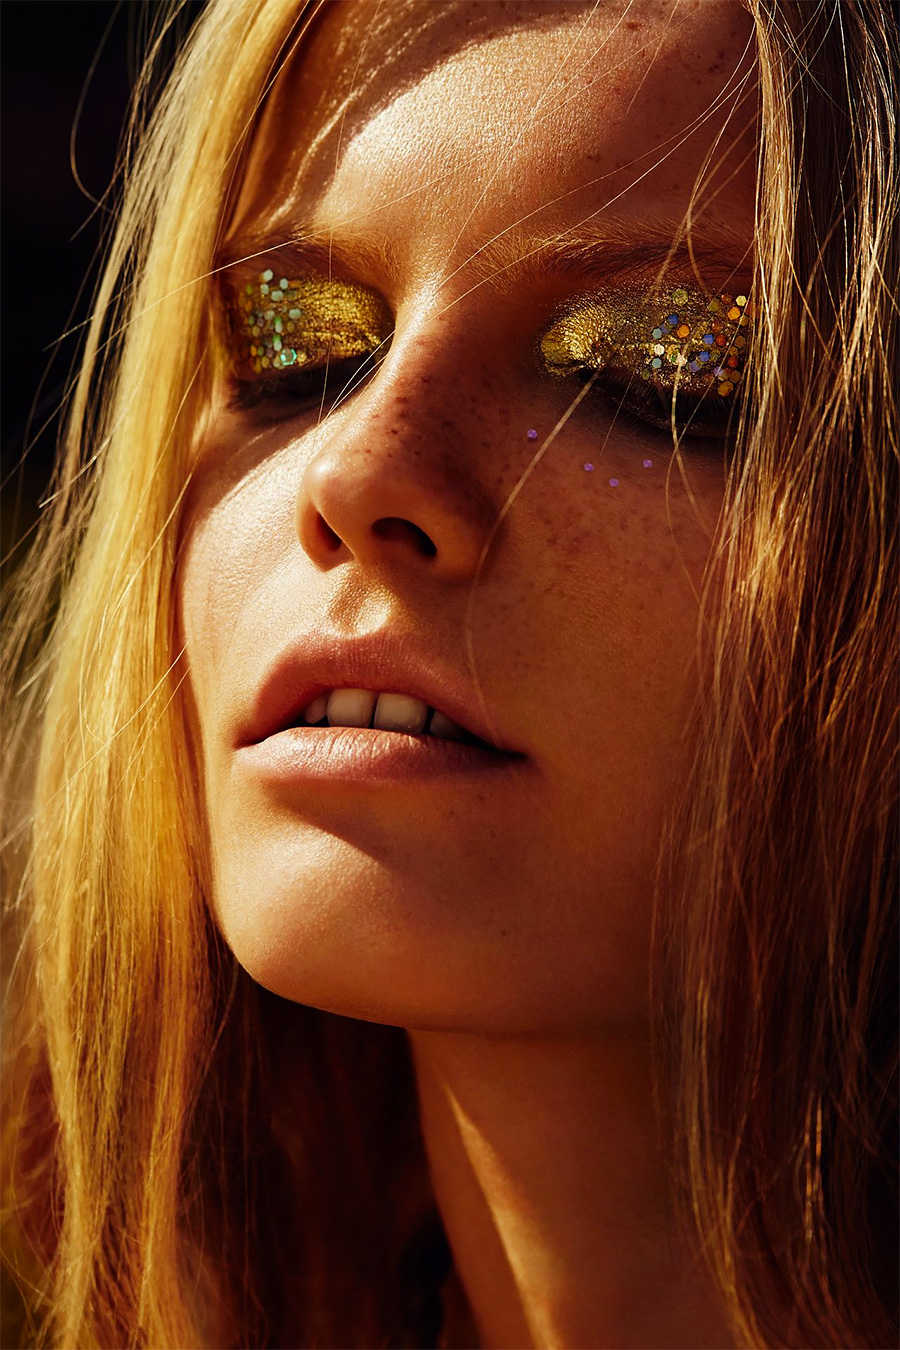 Beauty Photography by Karina Twiss | Daily design inspiration for ...